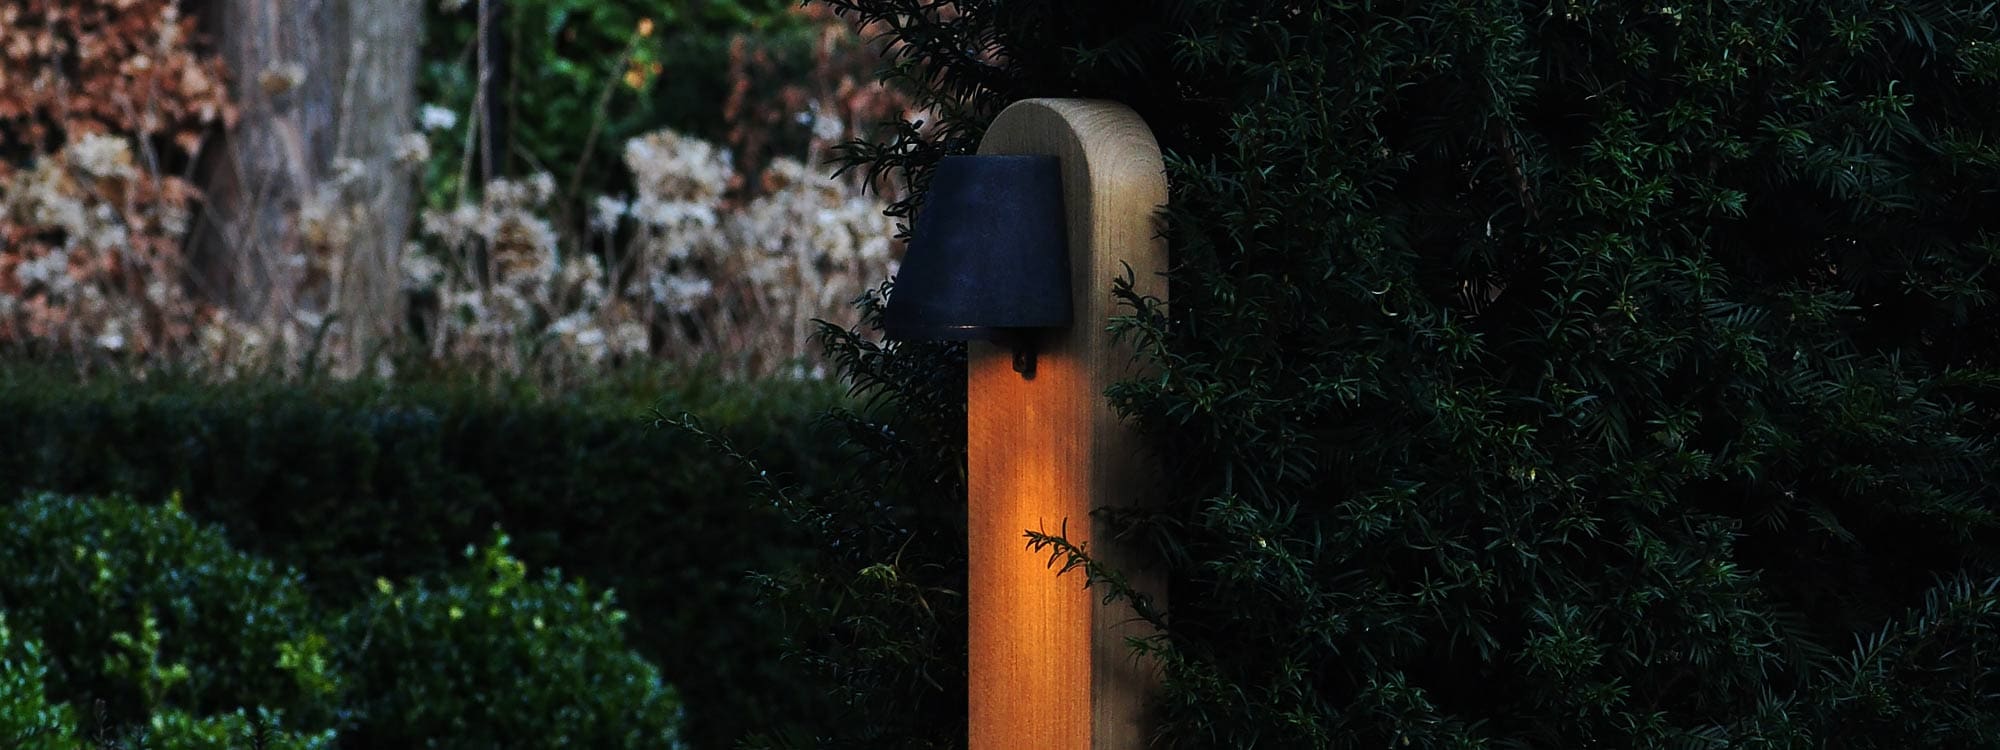 Nighttime image of Royal Botania Beamy teak post light surrounded by Taxus baccata